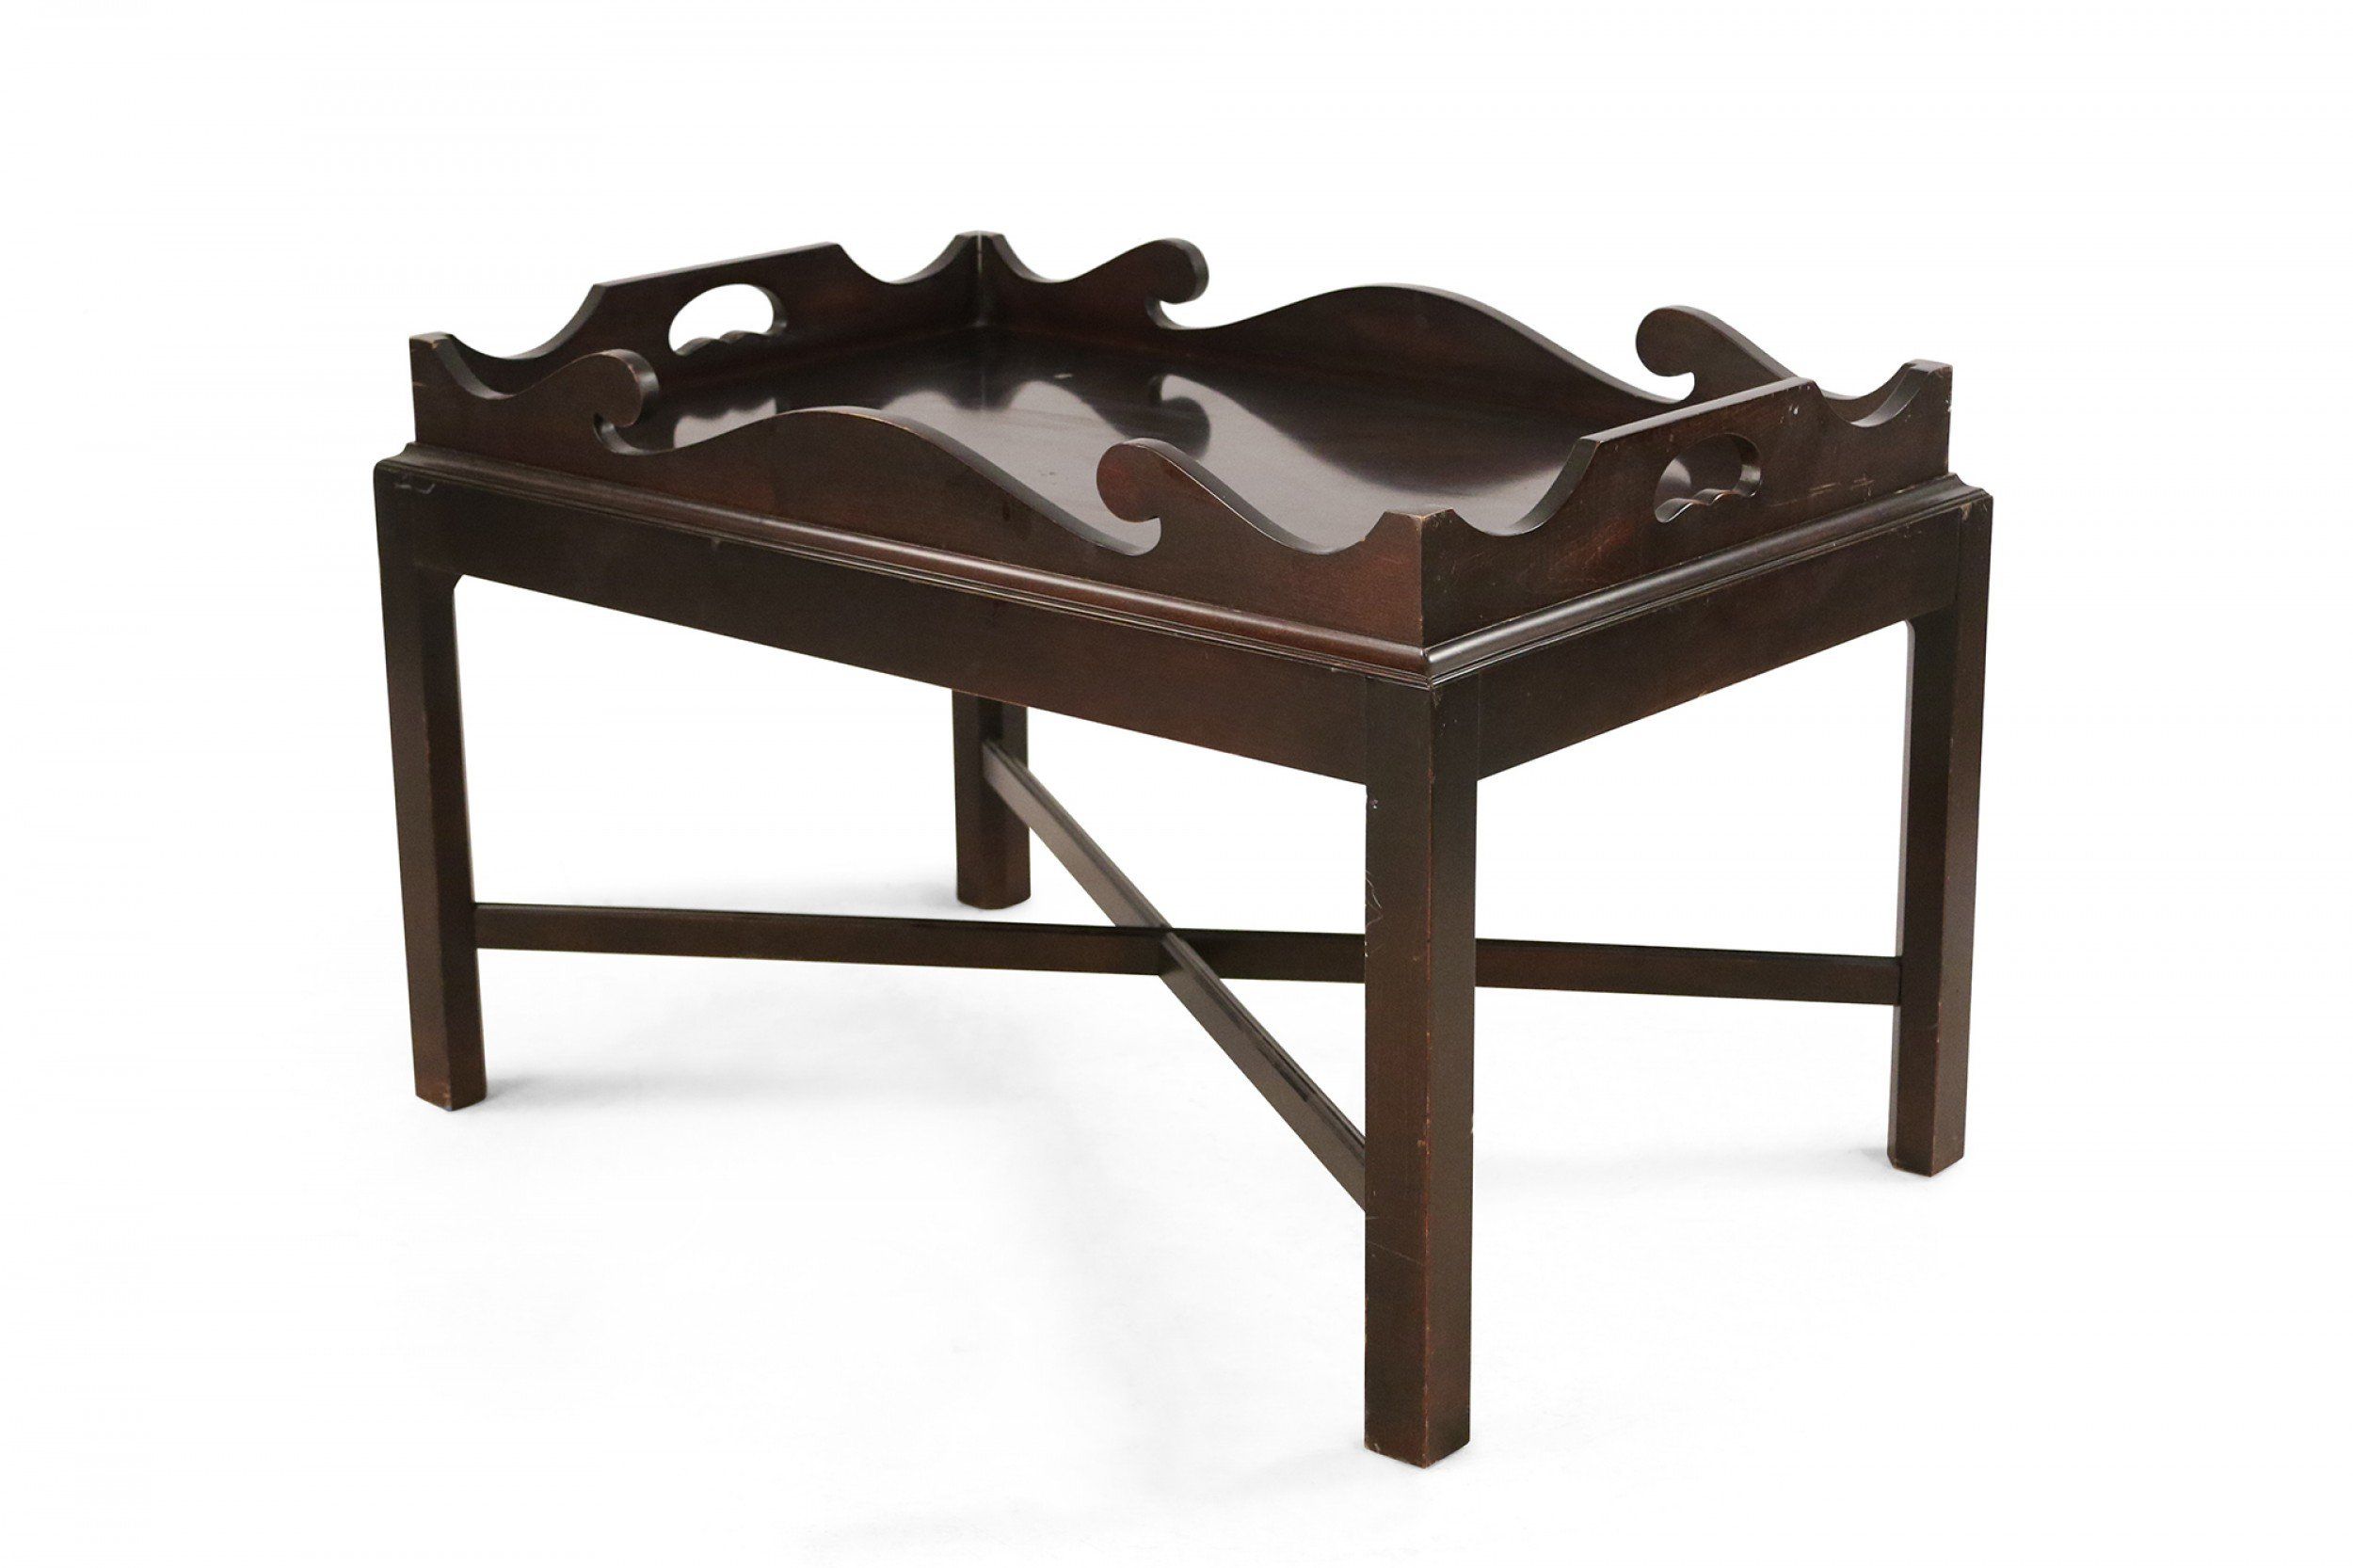 Contemporary Dark Wood Removable Tray Top Coffee Table Intended For Detachable Tray Coffee Tables (View 8 of 20)